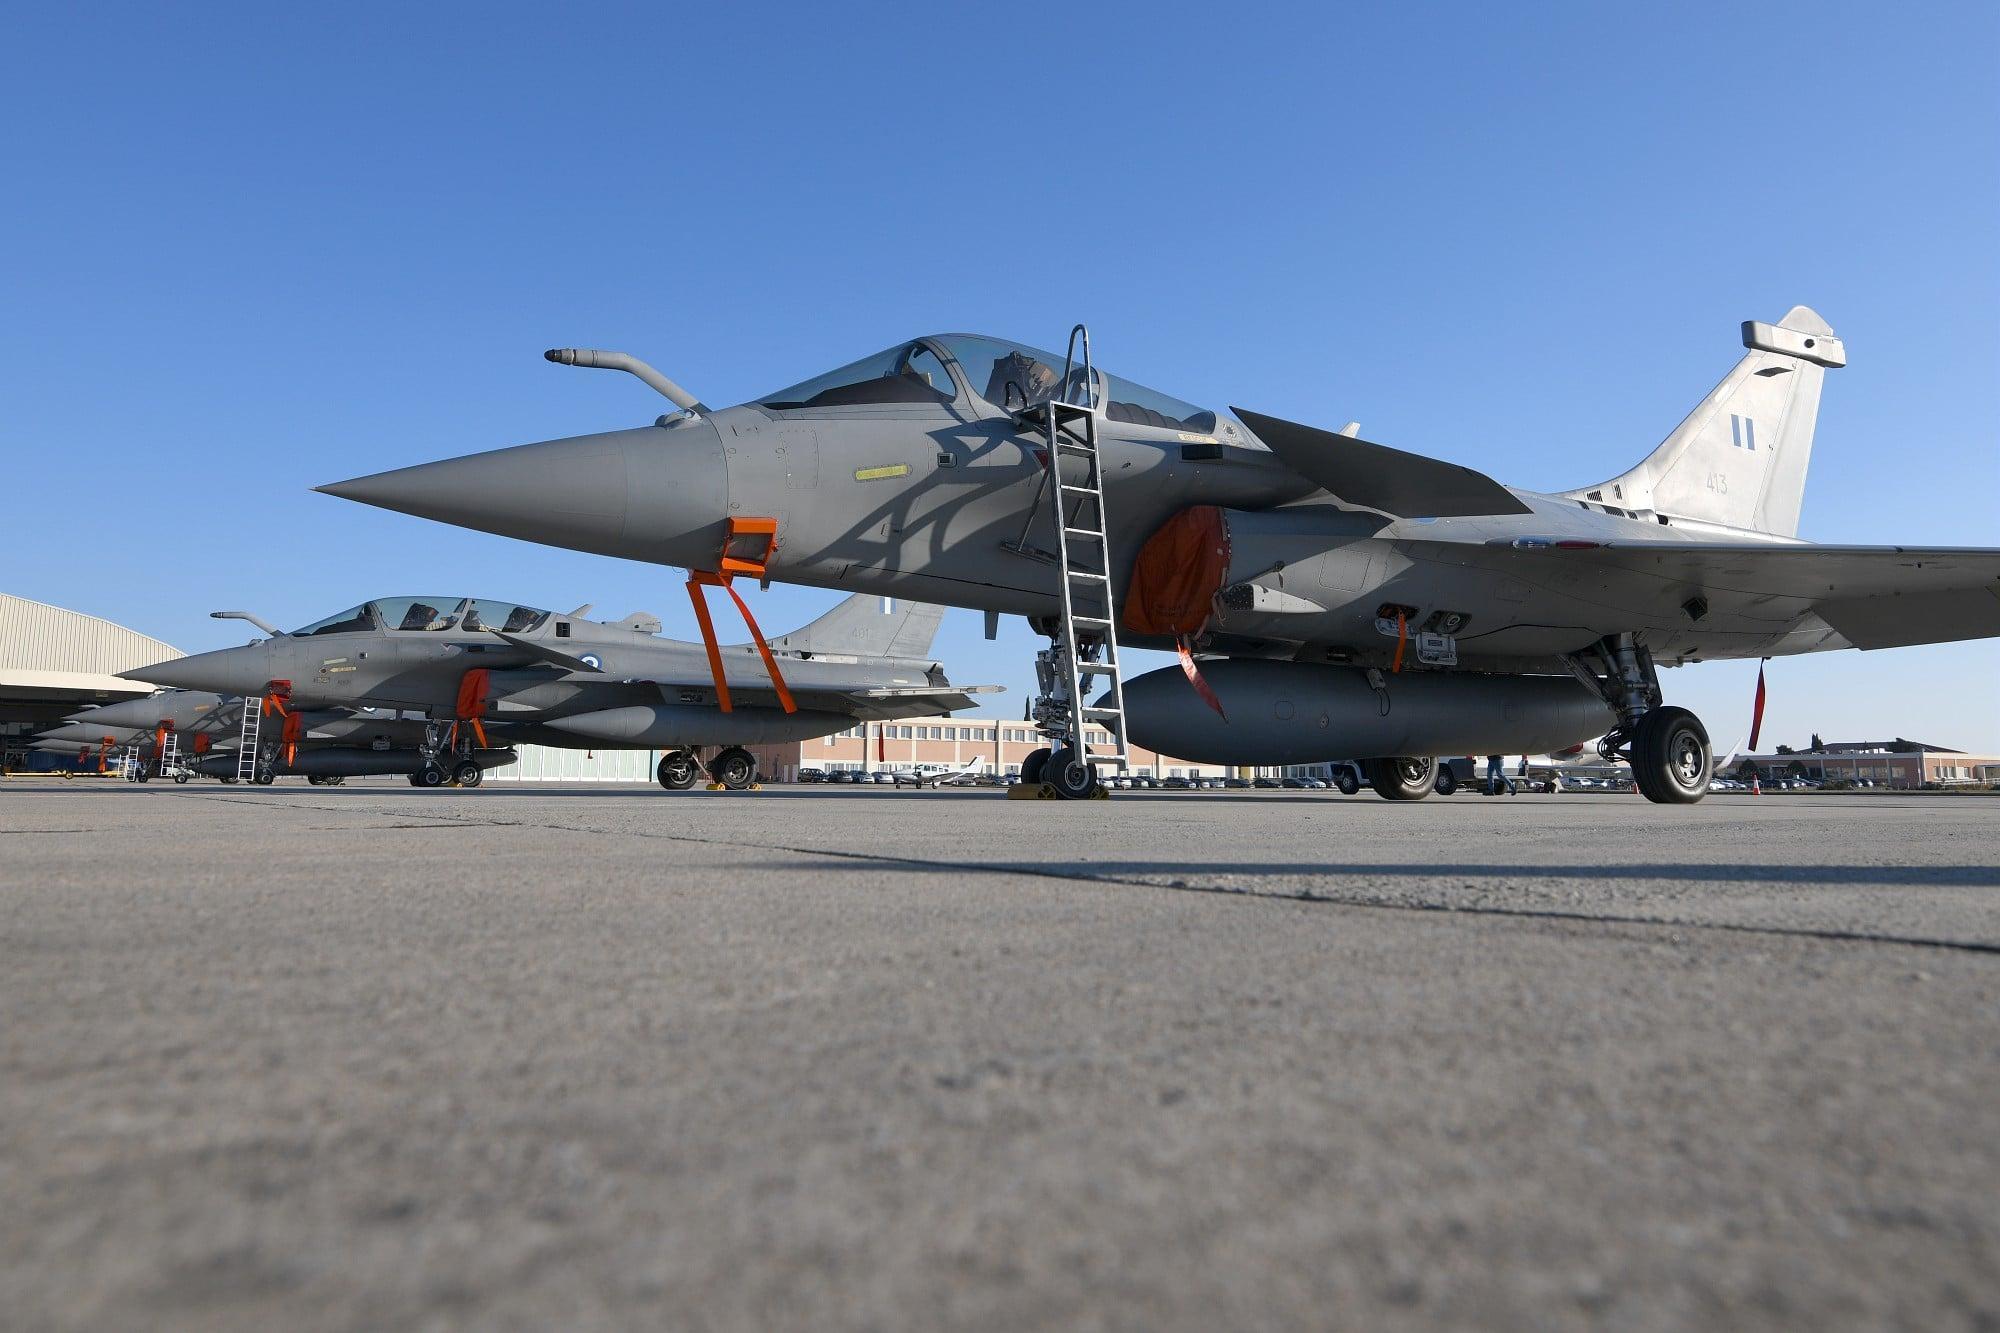 Hellenic Air Force pilots have completed the ferry of the first batch of six Rafale fighter jets from Dassault Aviation's site in Istres.